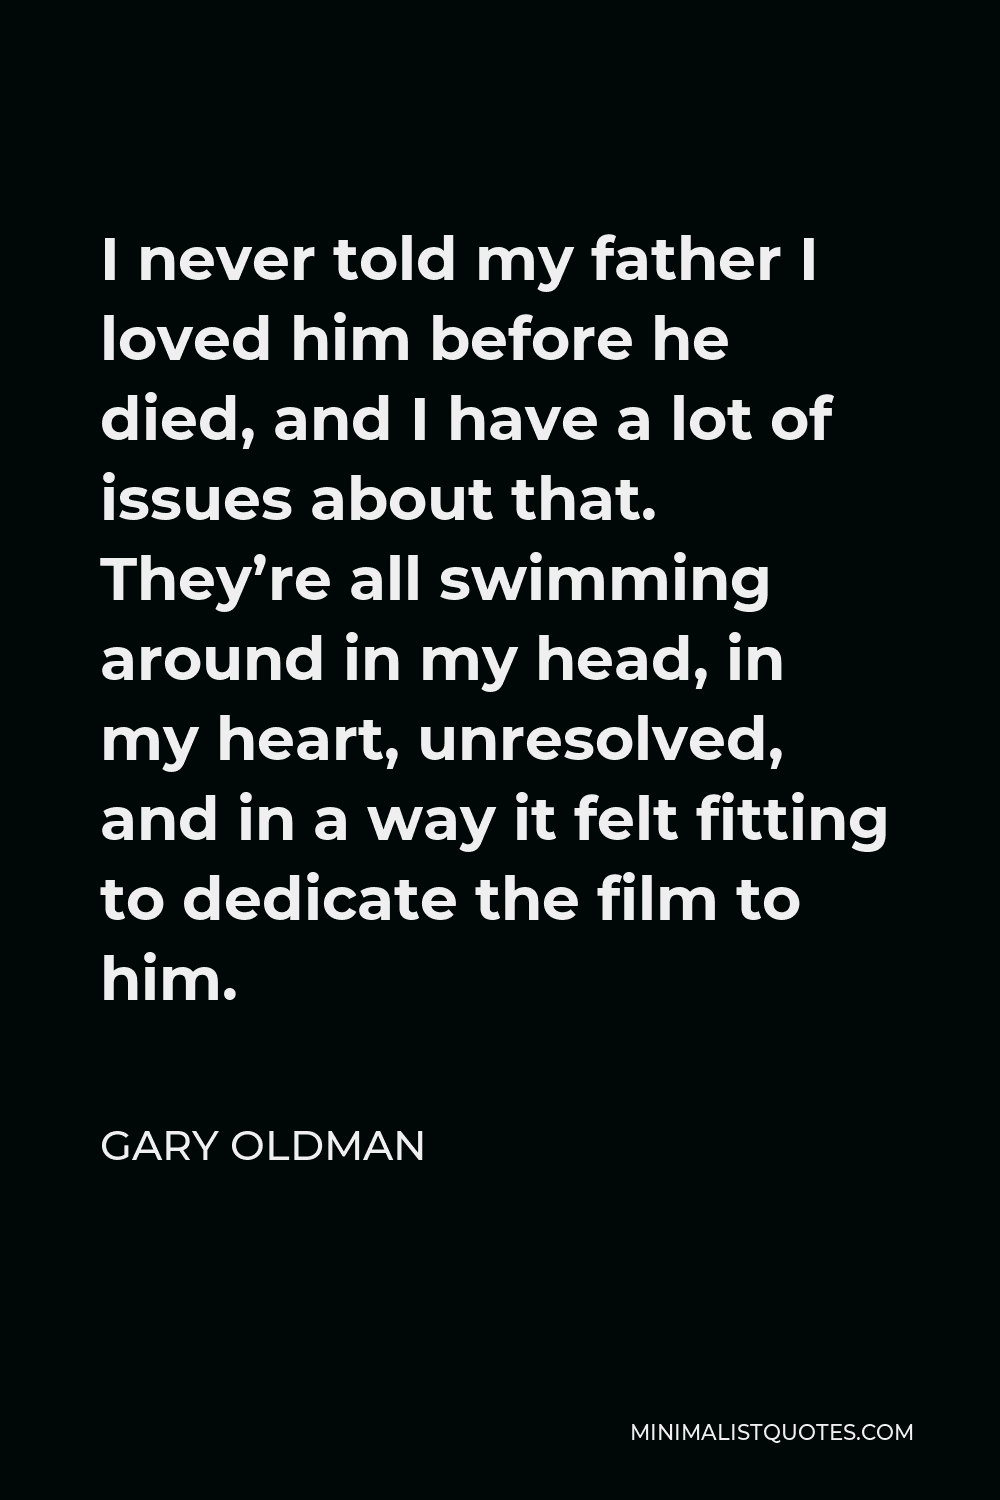 Gary Oldman Quote - I never told my father I loved him before he died, and I have a lot of issues about that. They’re all swimming around in my head, in my heart, unresolved, and in a way it felt fitting to dedicate the film to him.